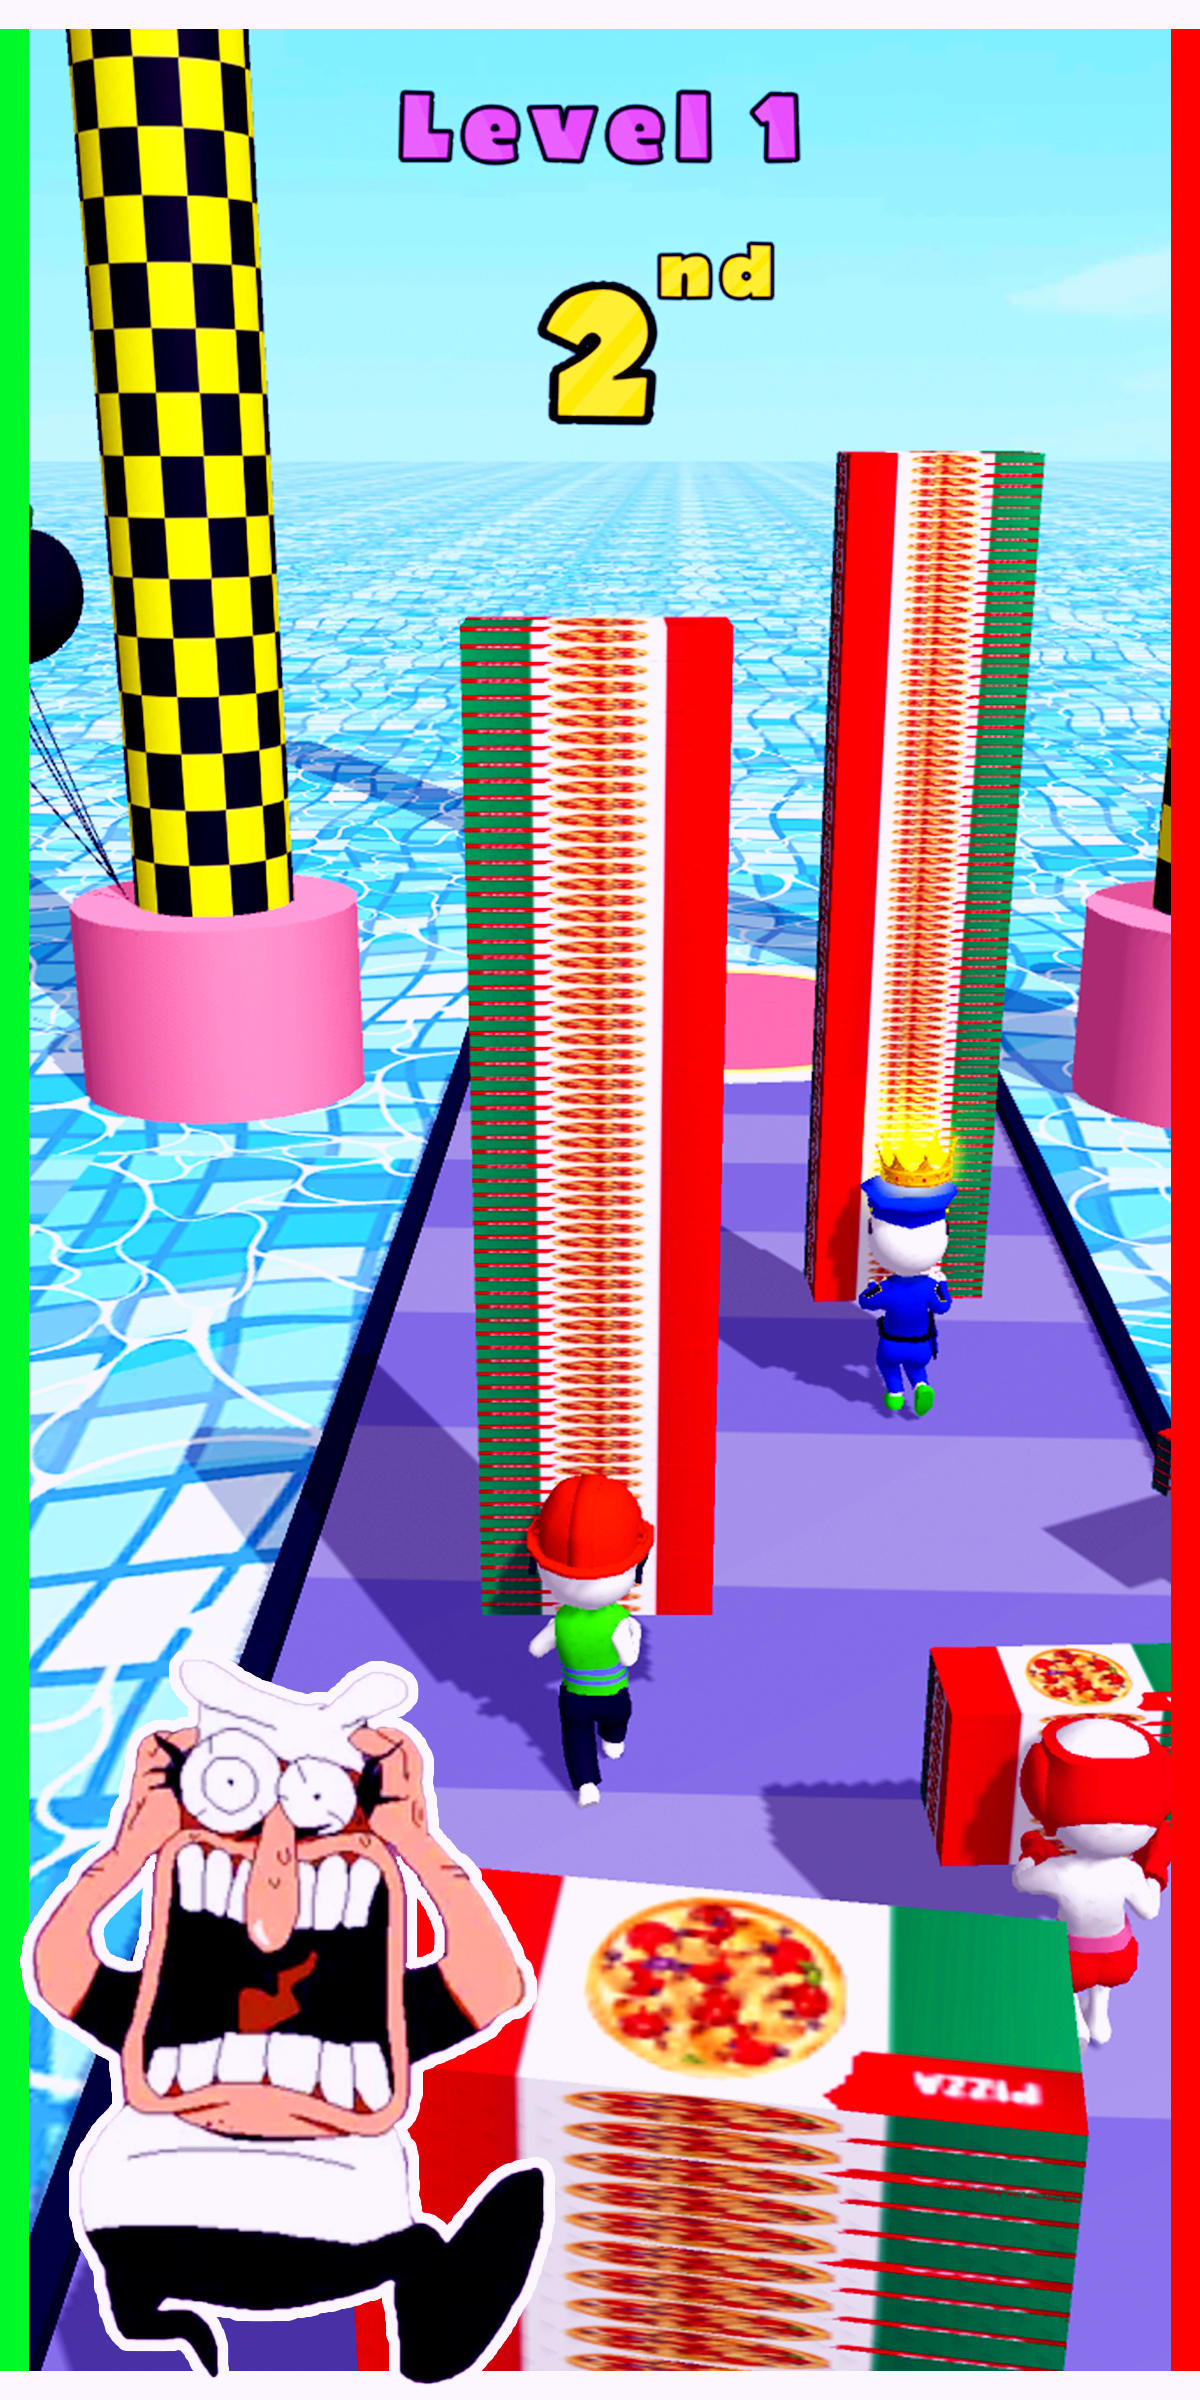 Pizza Tower Stack Runner mobile android iOS apk download for free